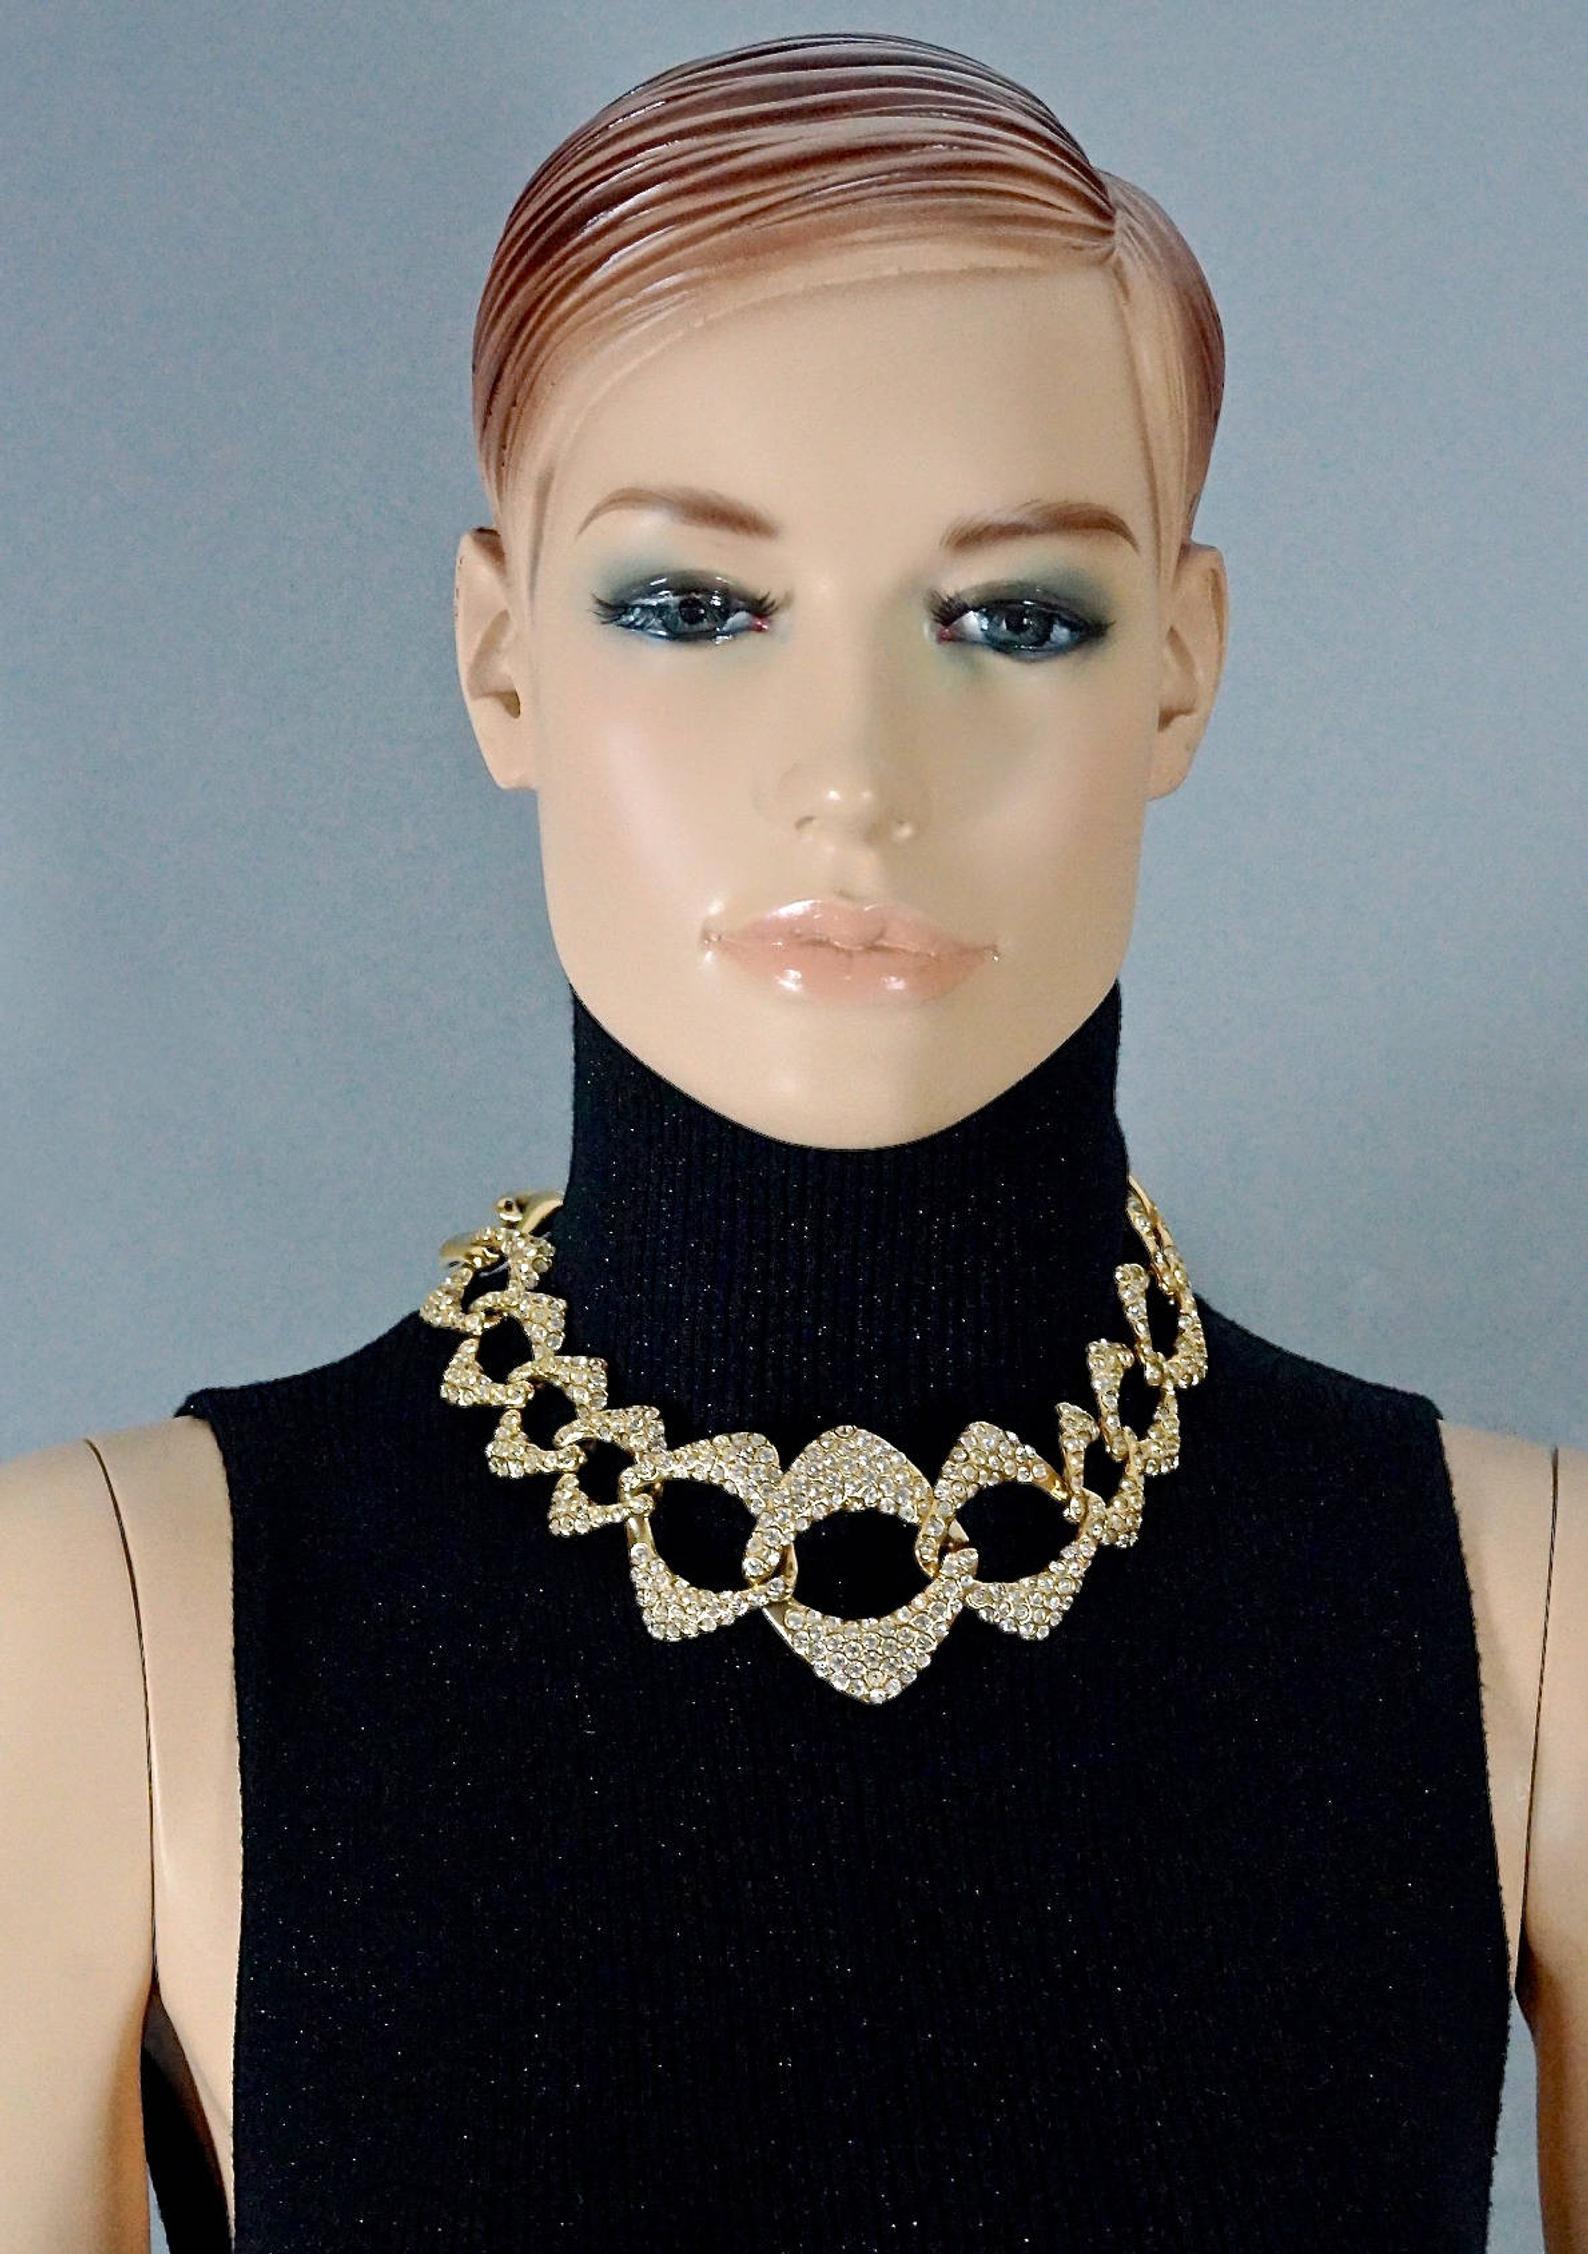 Vintage YVES SAINT LAURENT Ysl by Robert Goossens Rhinestone Chain Choker Necklace

Measurements:
Height: 2.16 inches (5.5 cm)
Wearable Length: 18.30 inches (46.5 cm) to 20.07 inches (51 cm)

Features:
- 100% Authentic YVES SAINT LAURENT by Robert